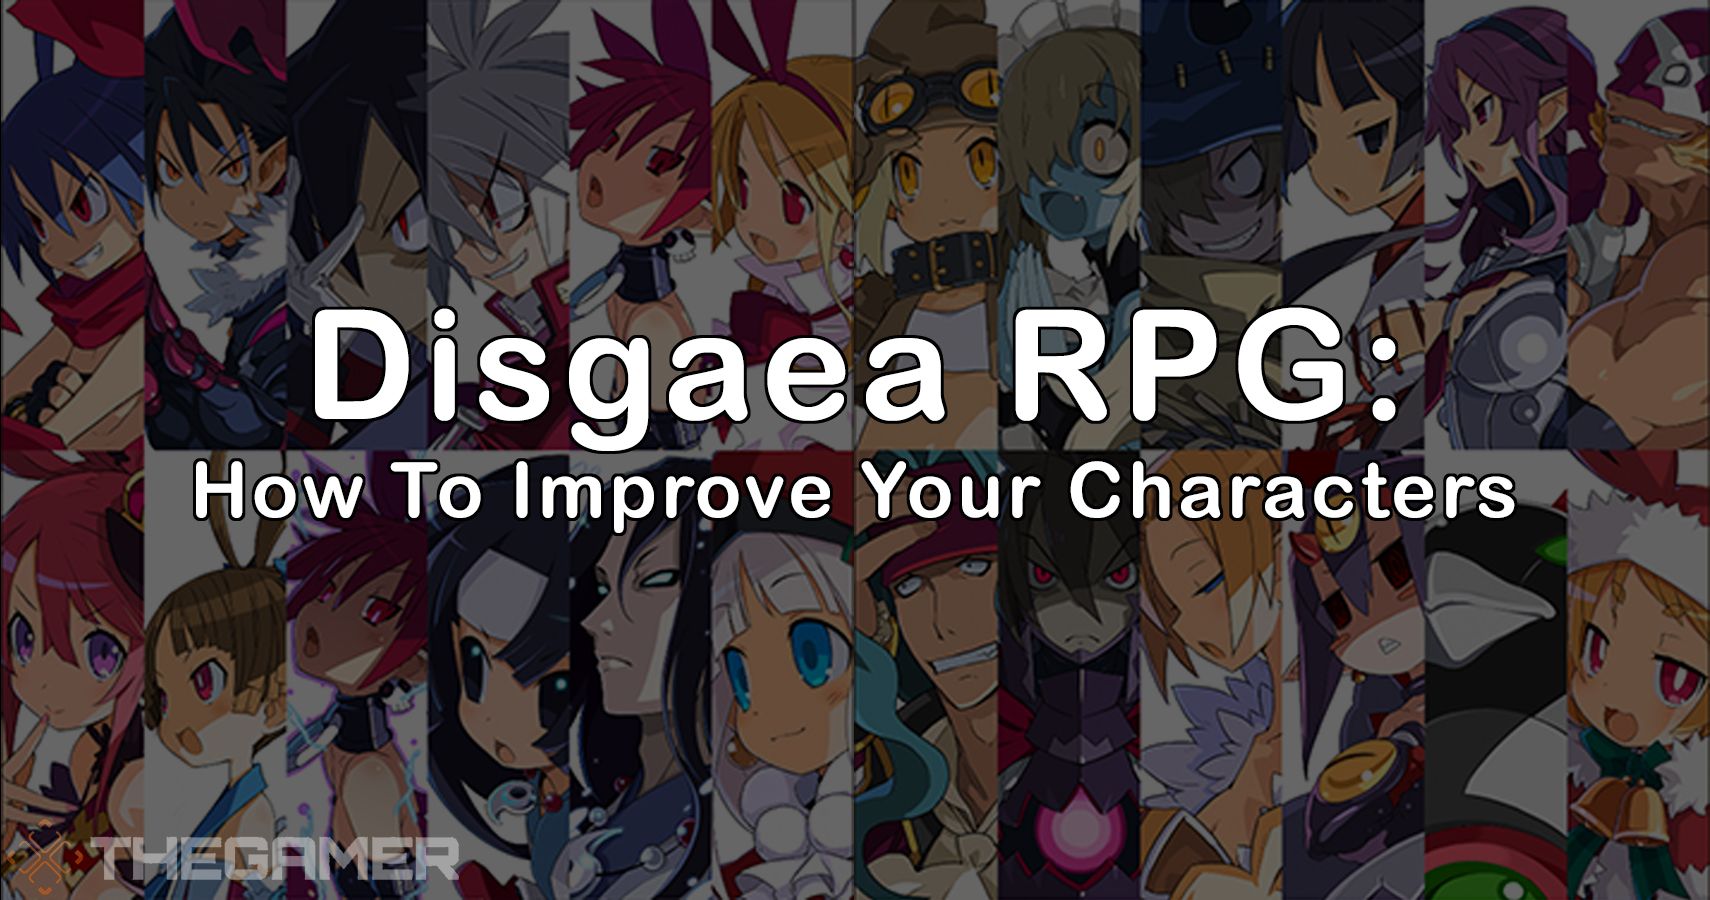 Disgaea RPG improve characters featured image